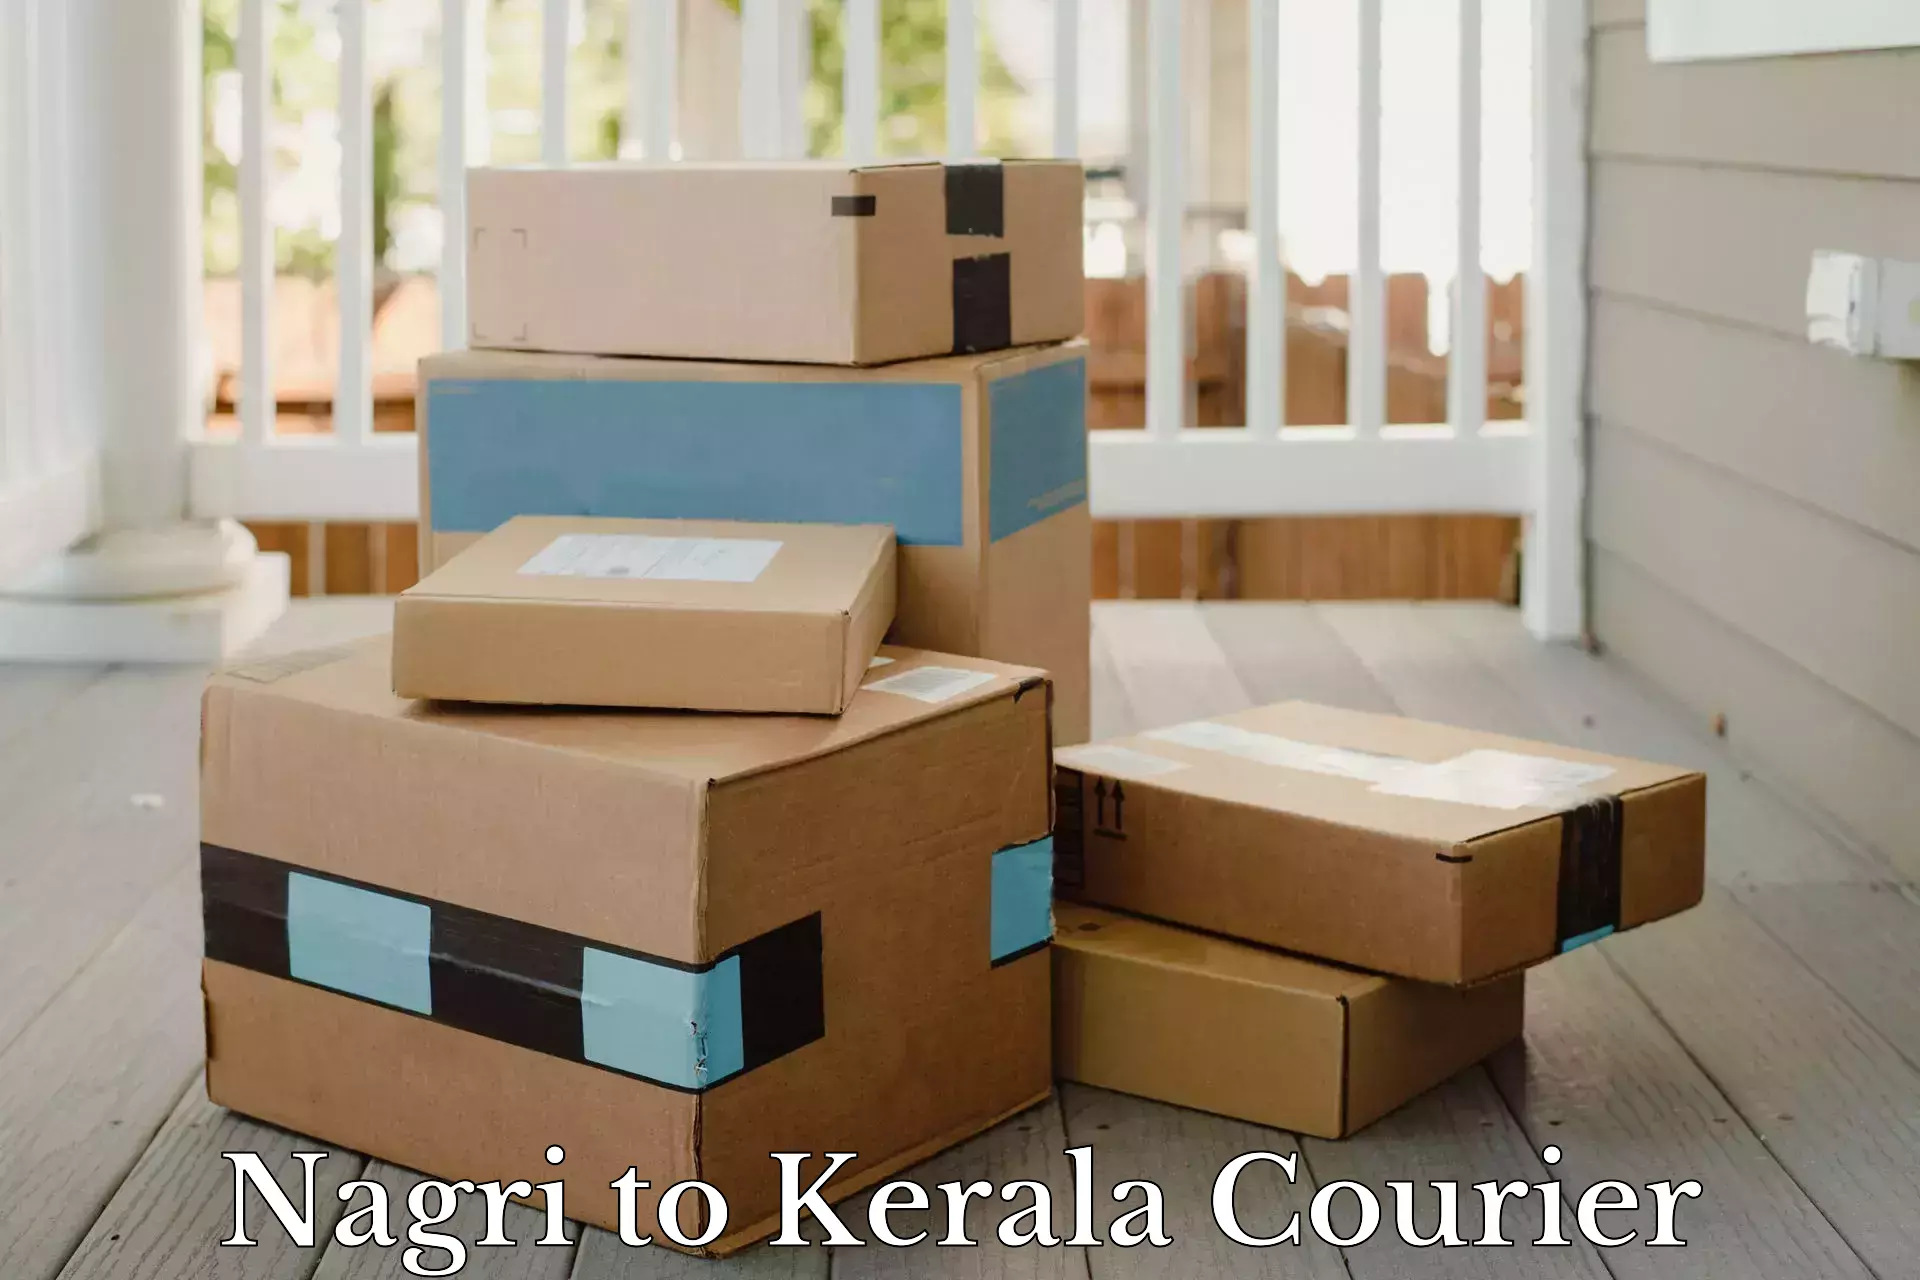 Professional courier services Nagri to Cochin Port Kochi